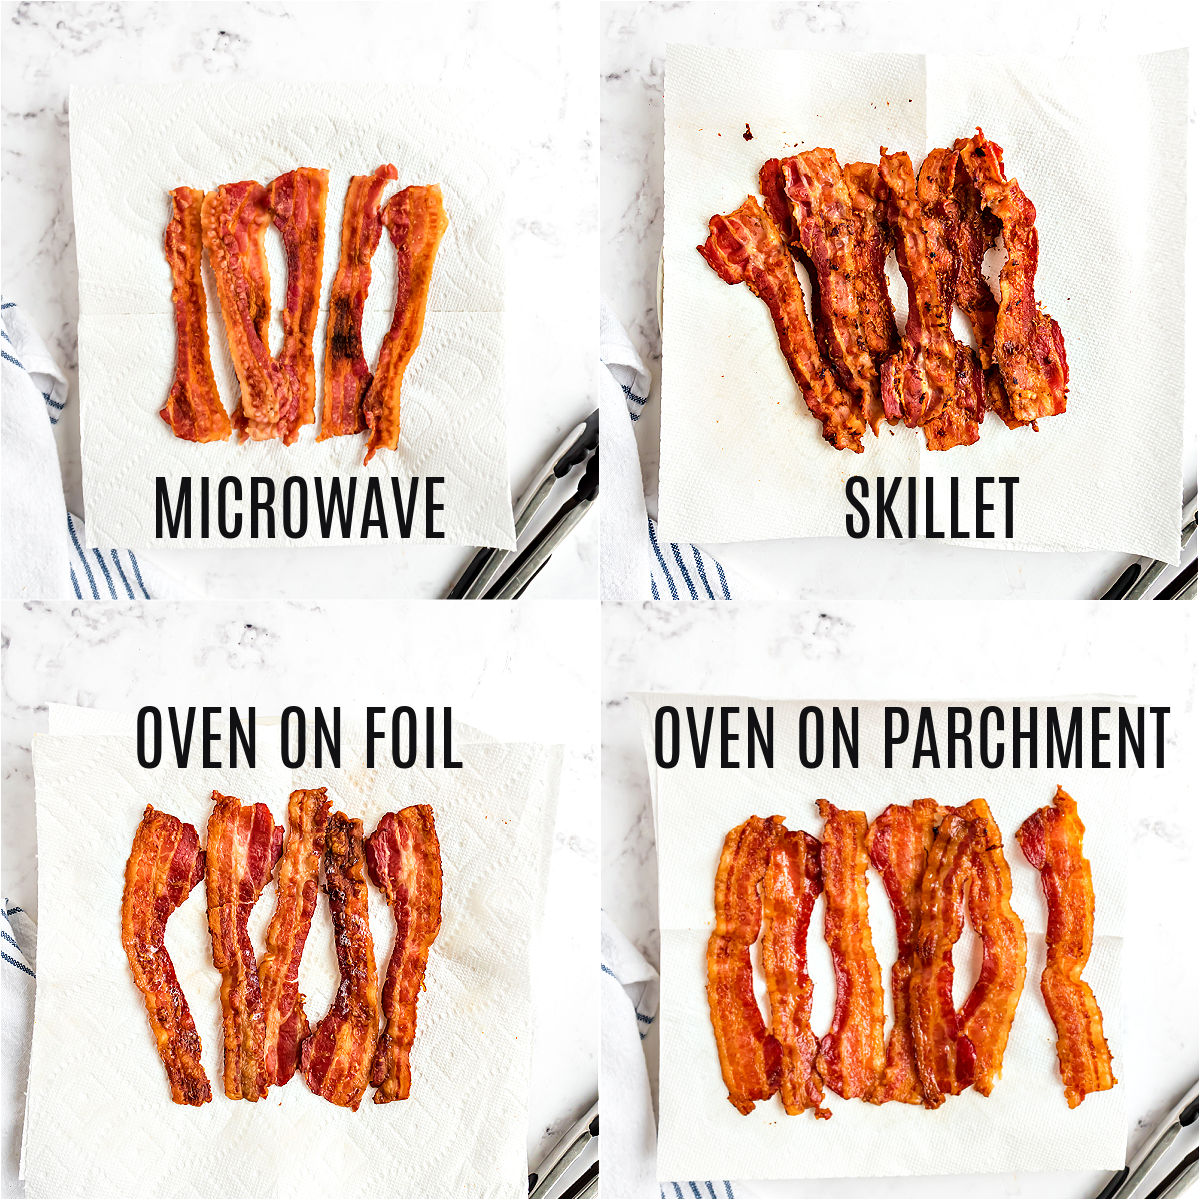 Cooked bacon comparison chart.